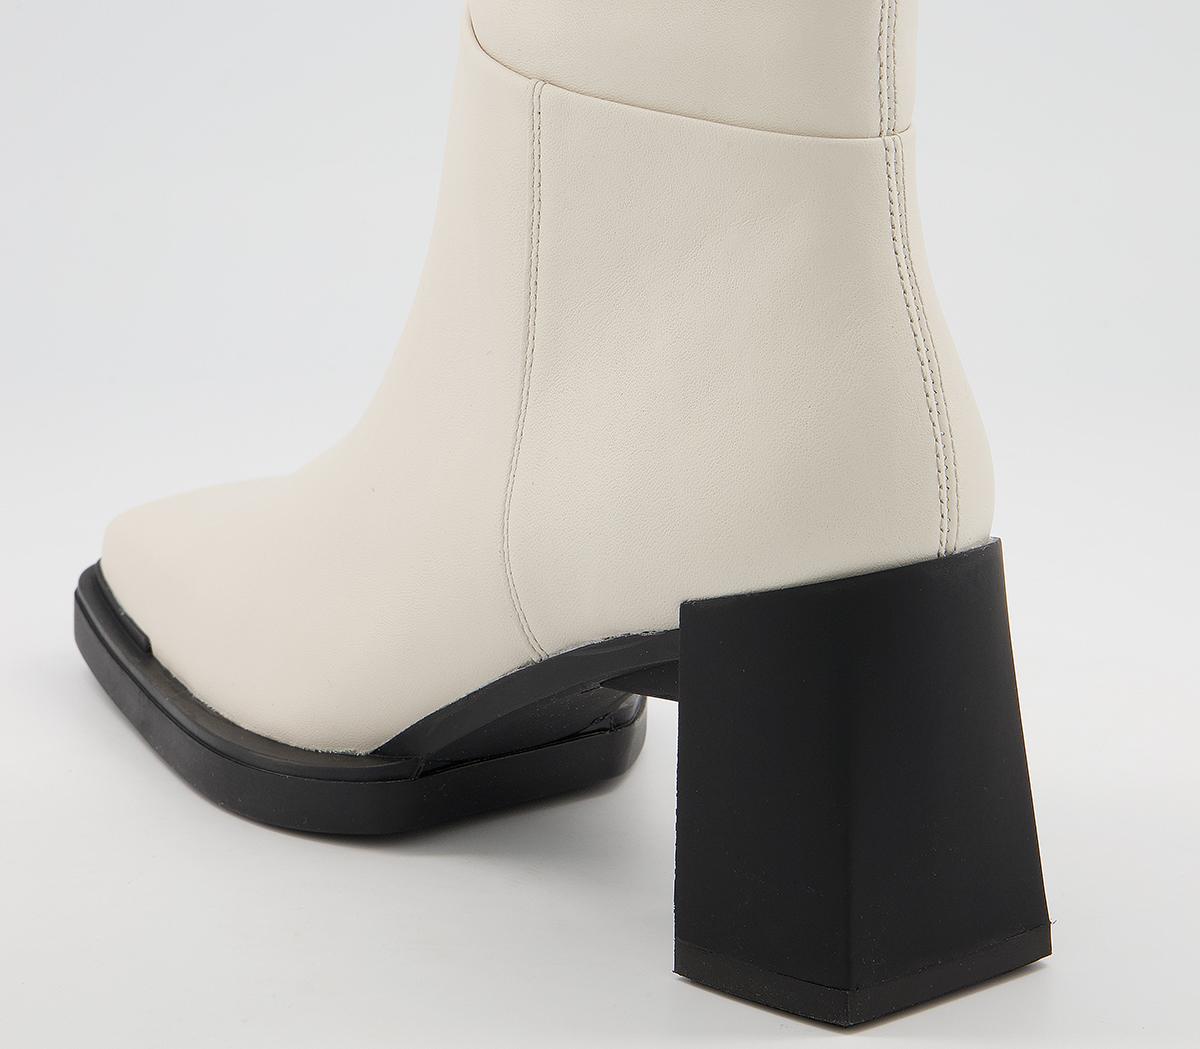 Vagabond Shoemakers Edwina Boots Off White - Women's Ankle Boots